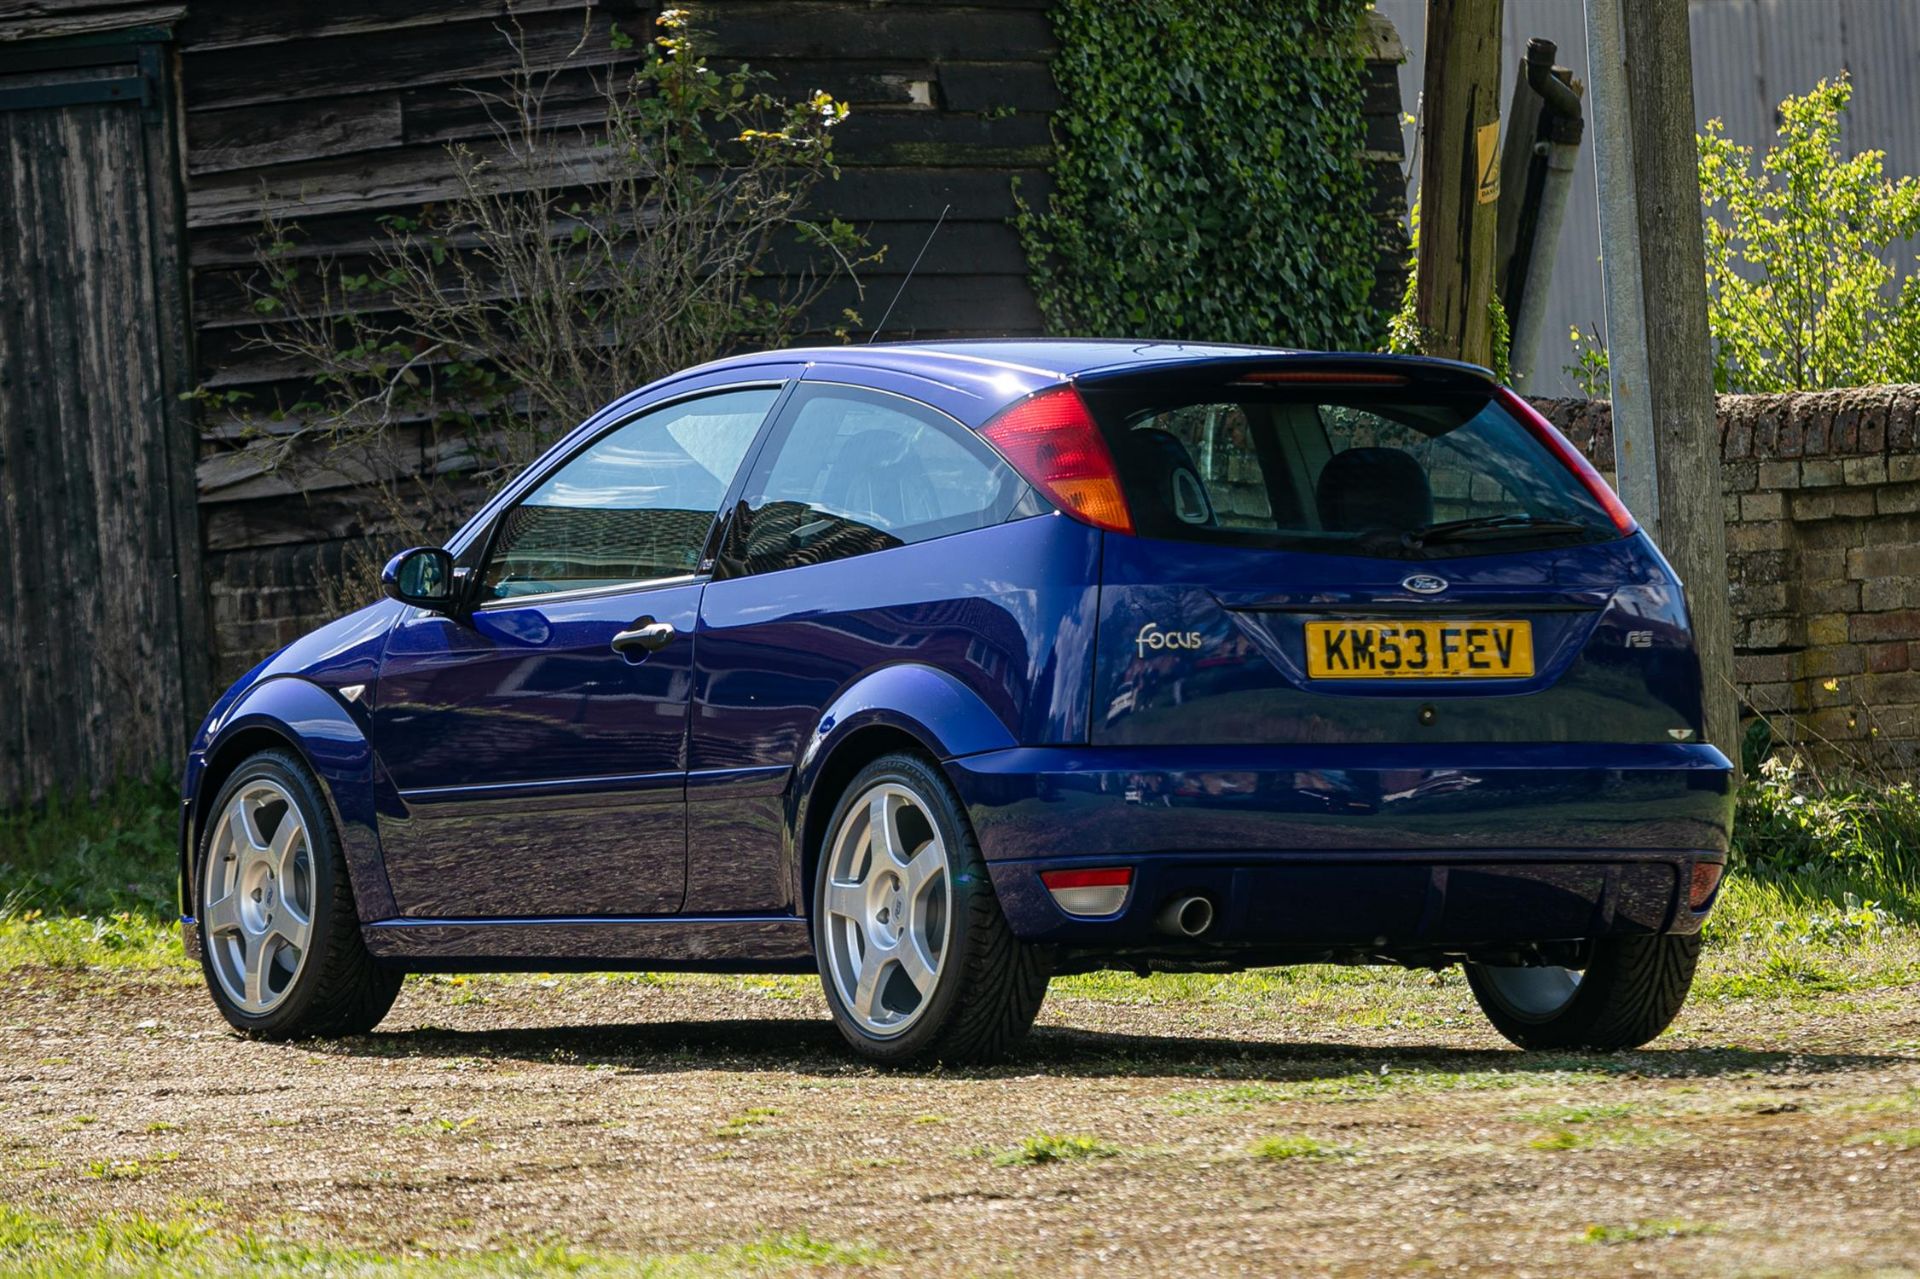 2003 Ford Focus RS Mk1 - 3265 Miles - Image 4 of 10